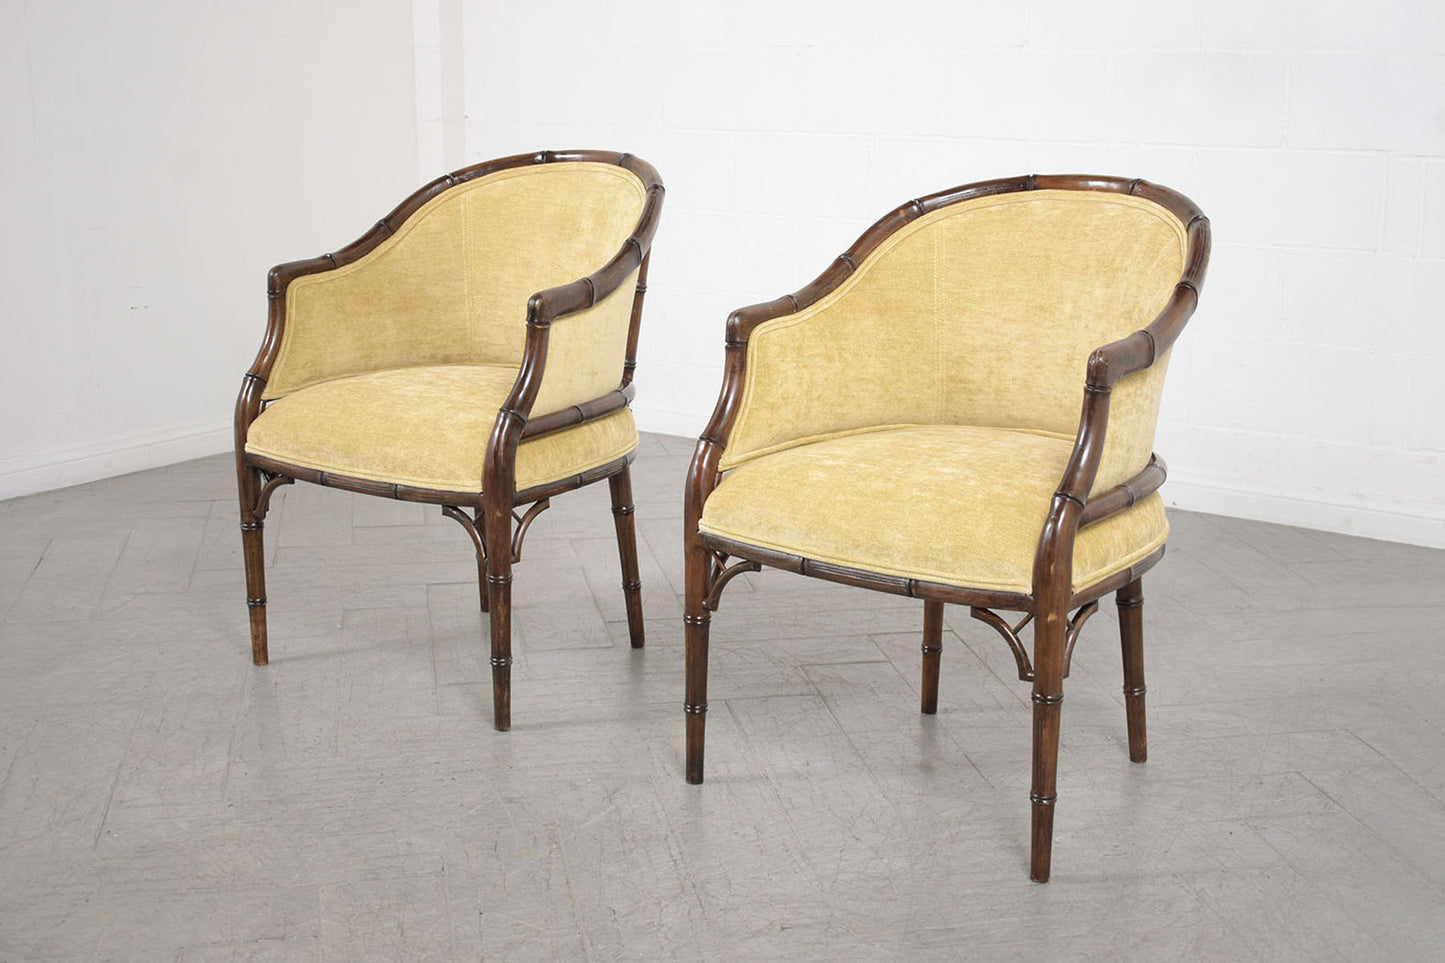 Pair of Vintage 1960s Faux Bamboo Armchairs - Champagne Fabric